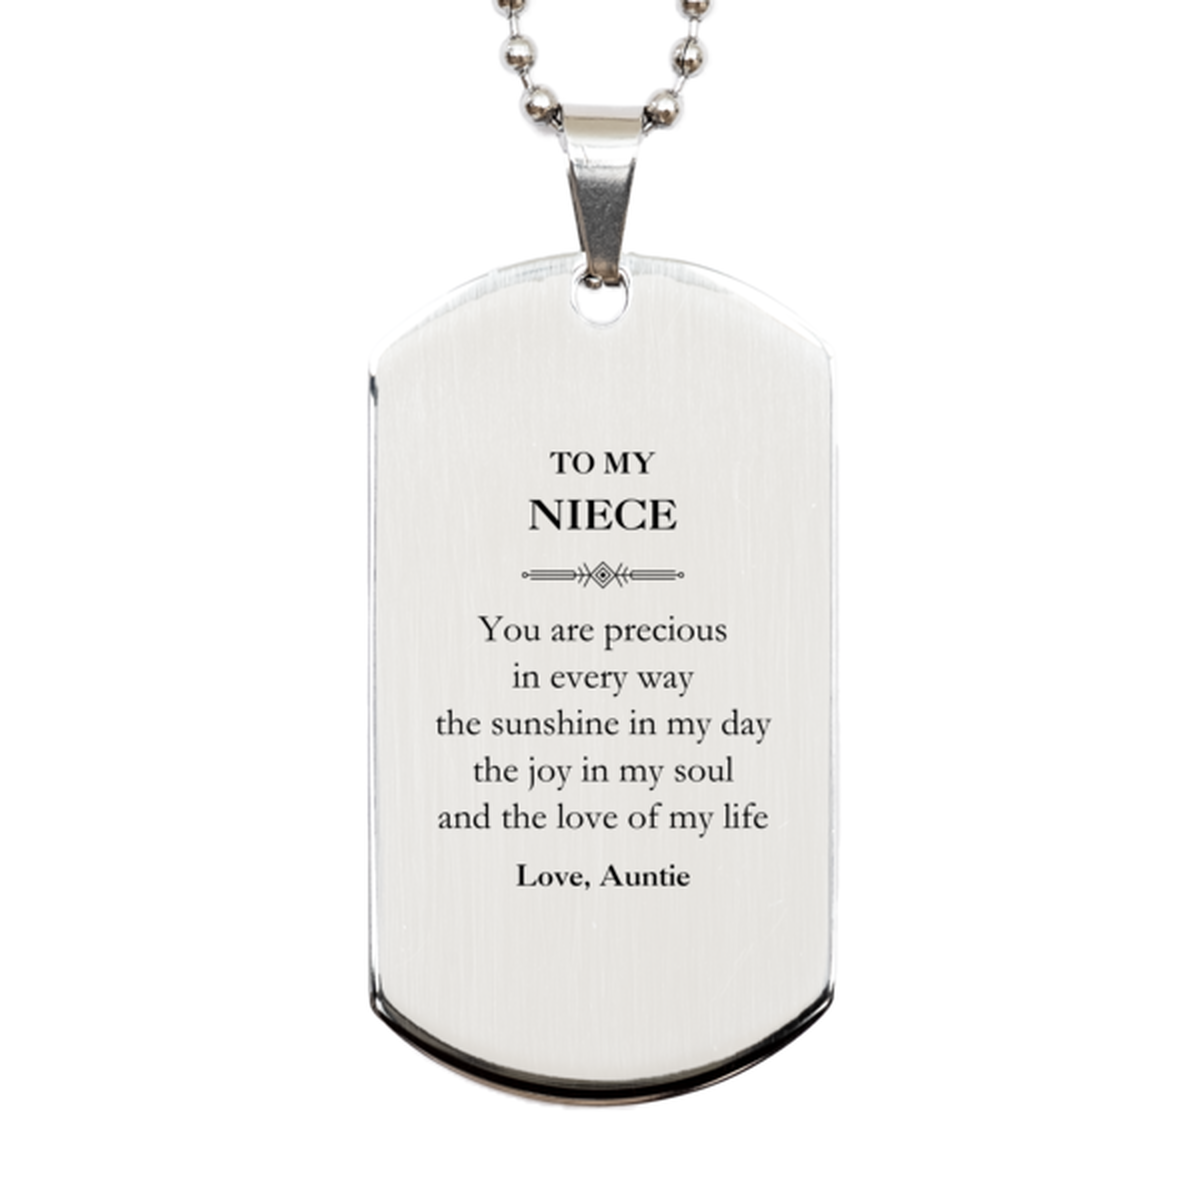 Graduation Gifts for Niece Silver Dog Tag Present from Auntie, Christmas Niece Birthday Gifts Niece You are precious in every way the sunshine in my day. Love, Auntie